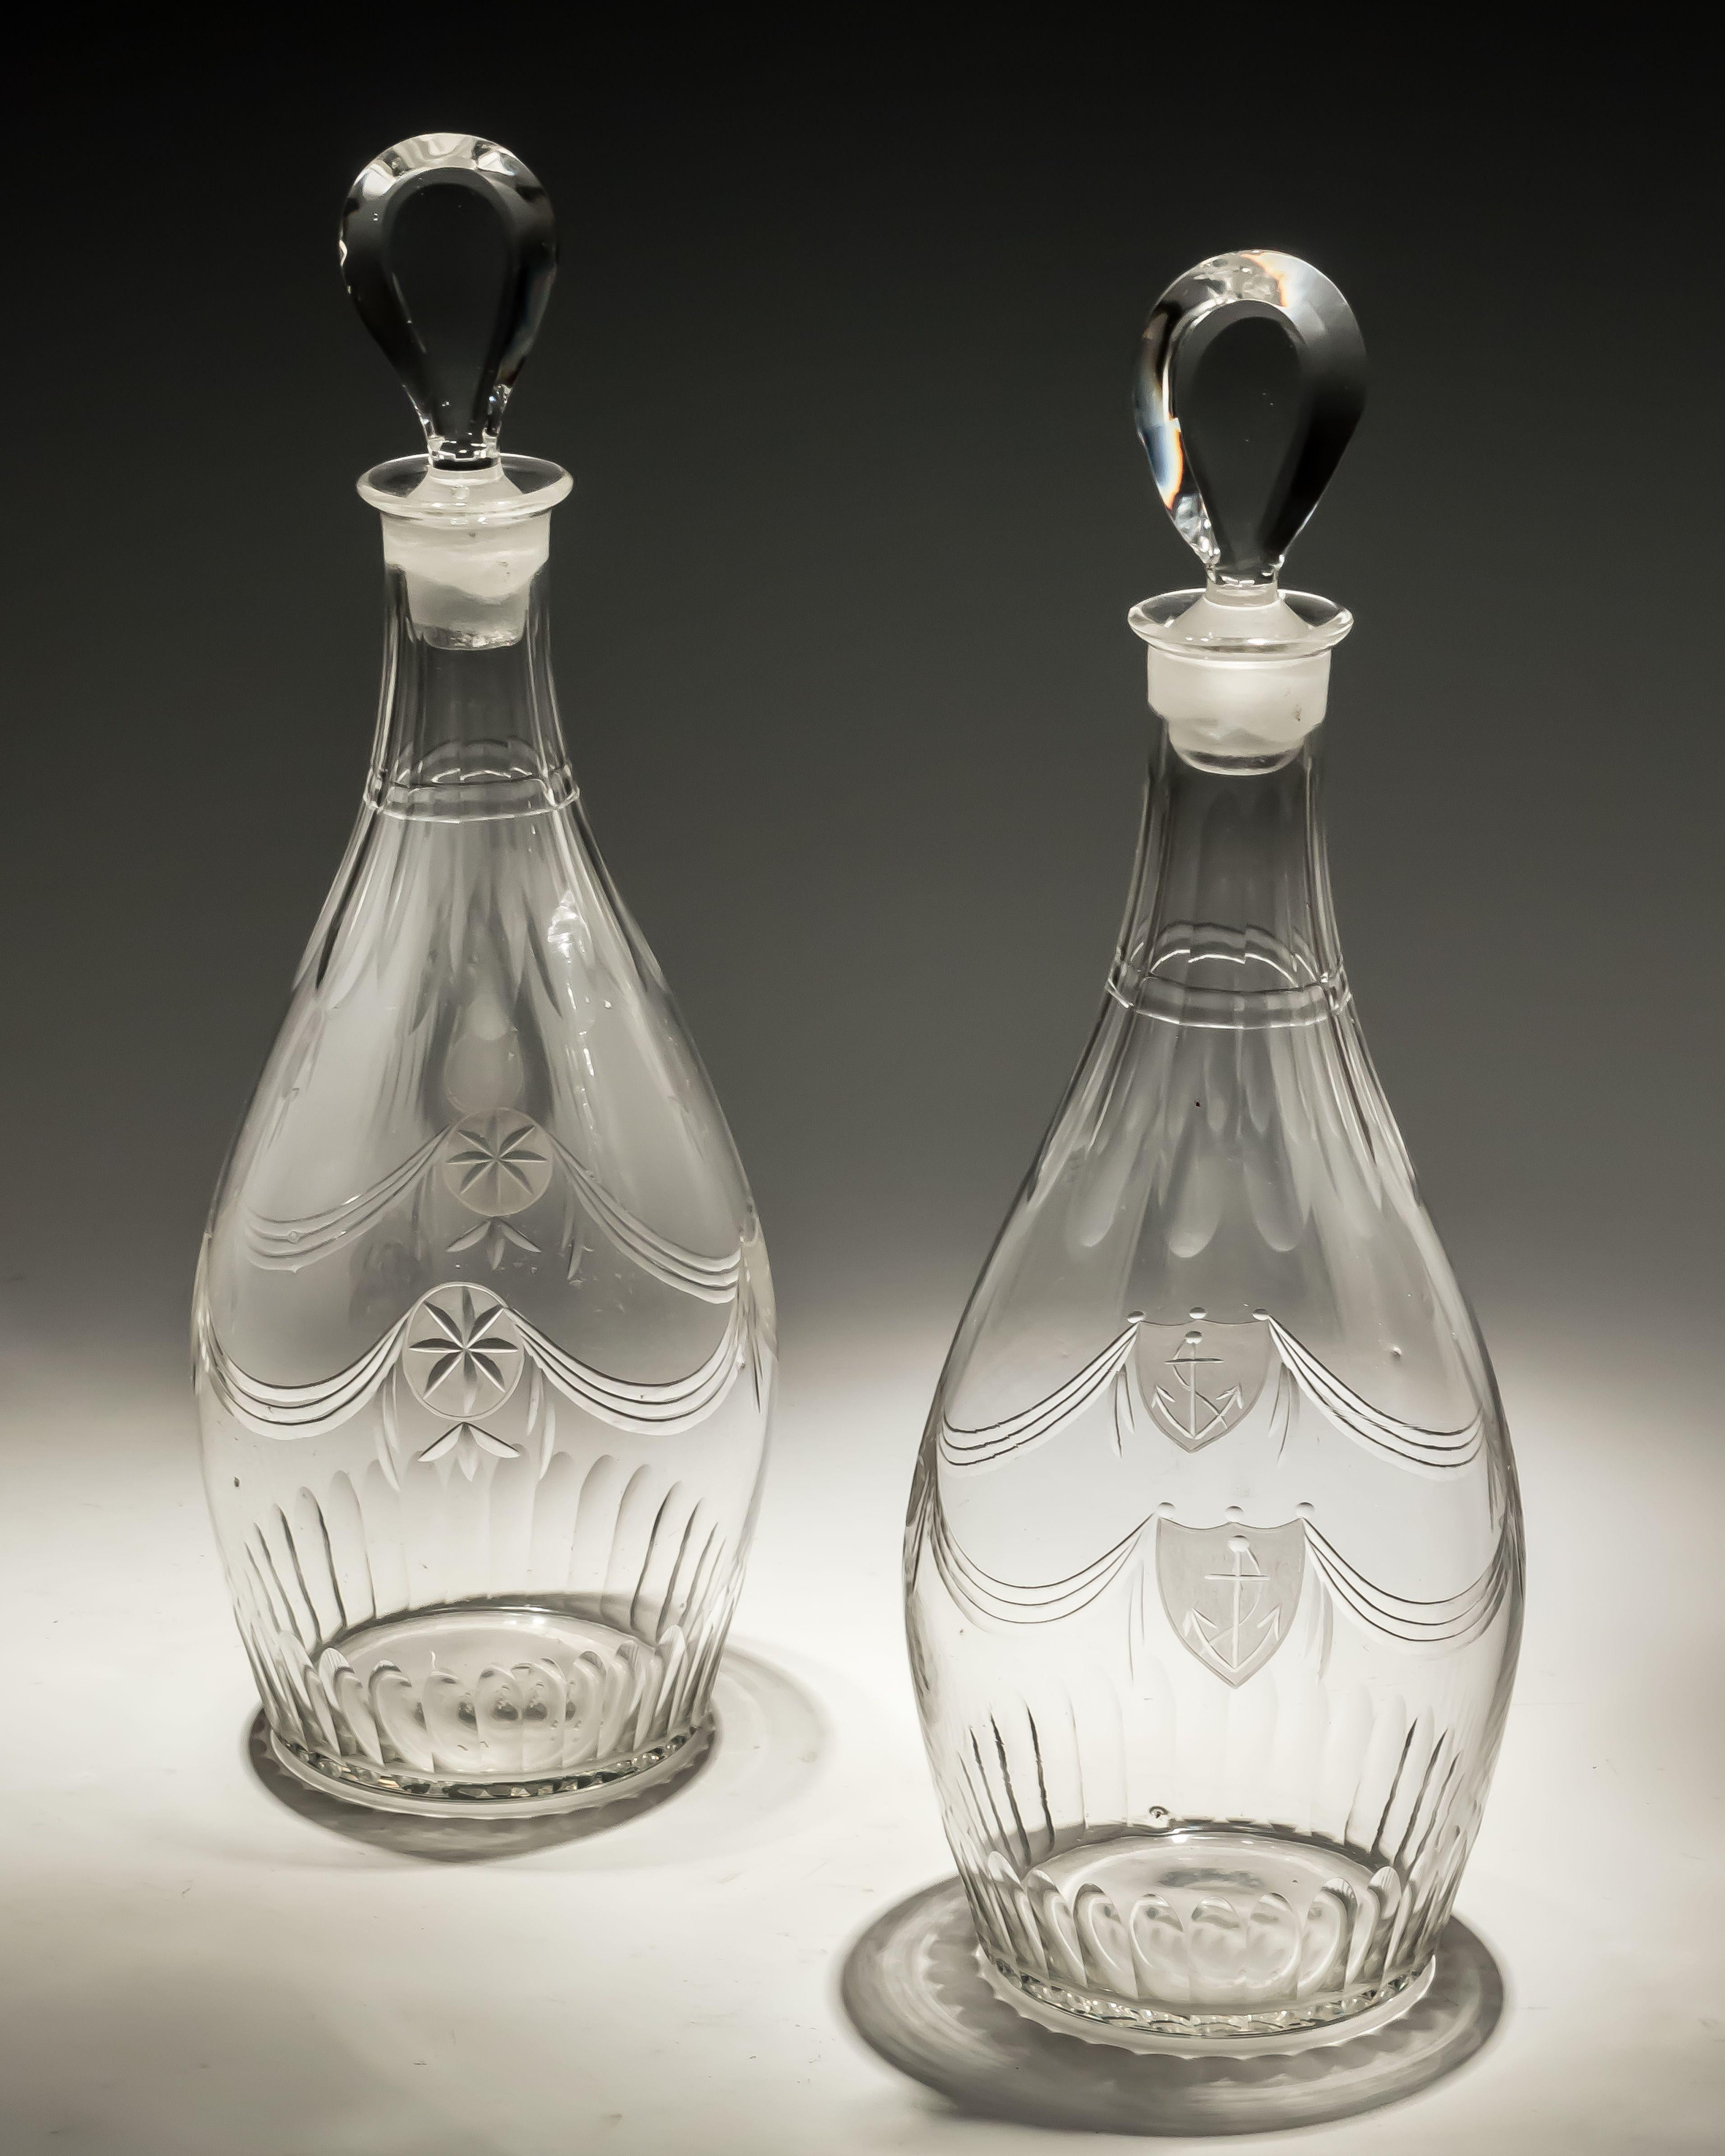 A suite of late 18th century Adam period cut glass, comprising of two club shaped decanters with tear drop stoppers, and five conical stem glasses, all finely engraved with swags, frosted stars and shields with anchors suggesting a nautical